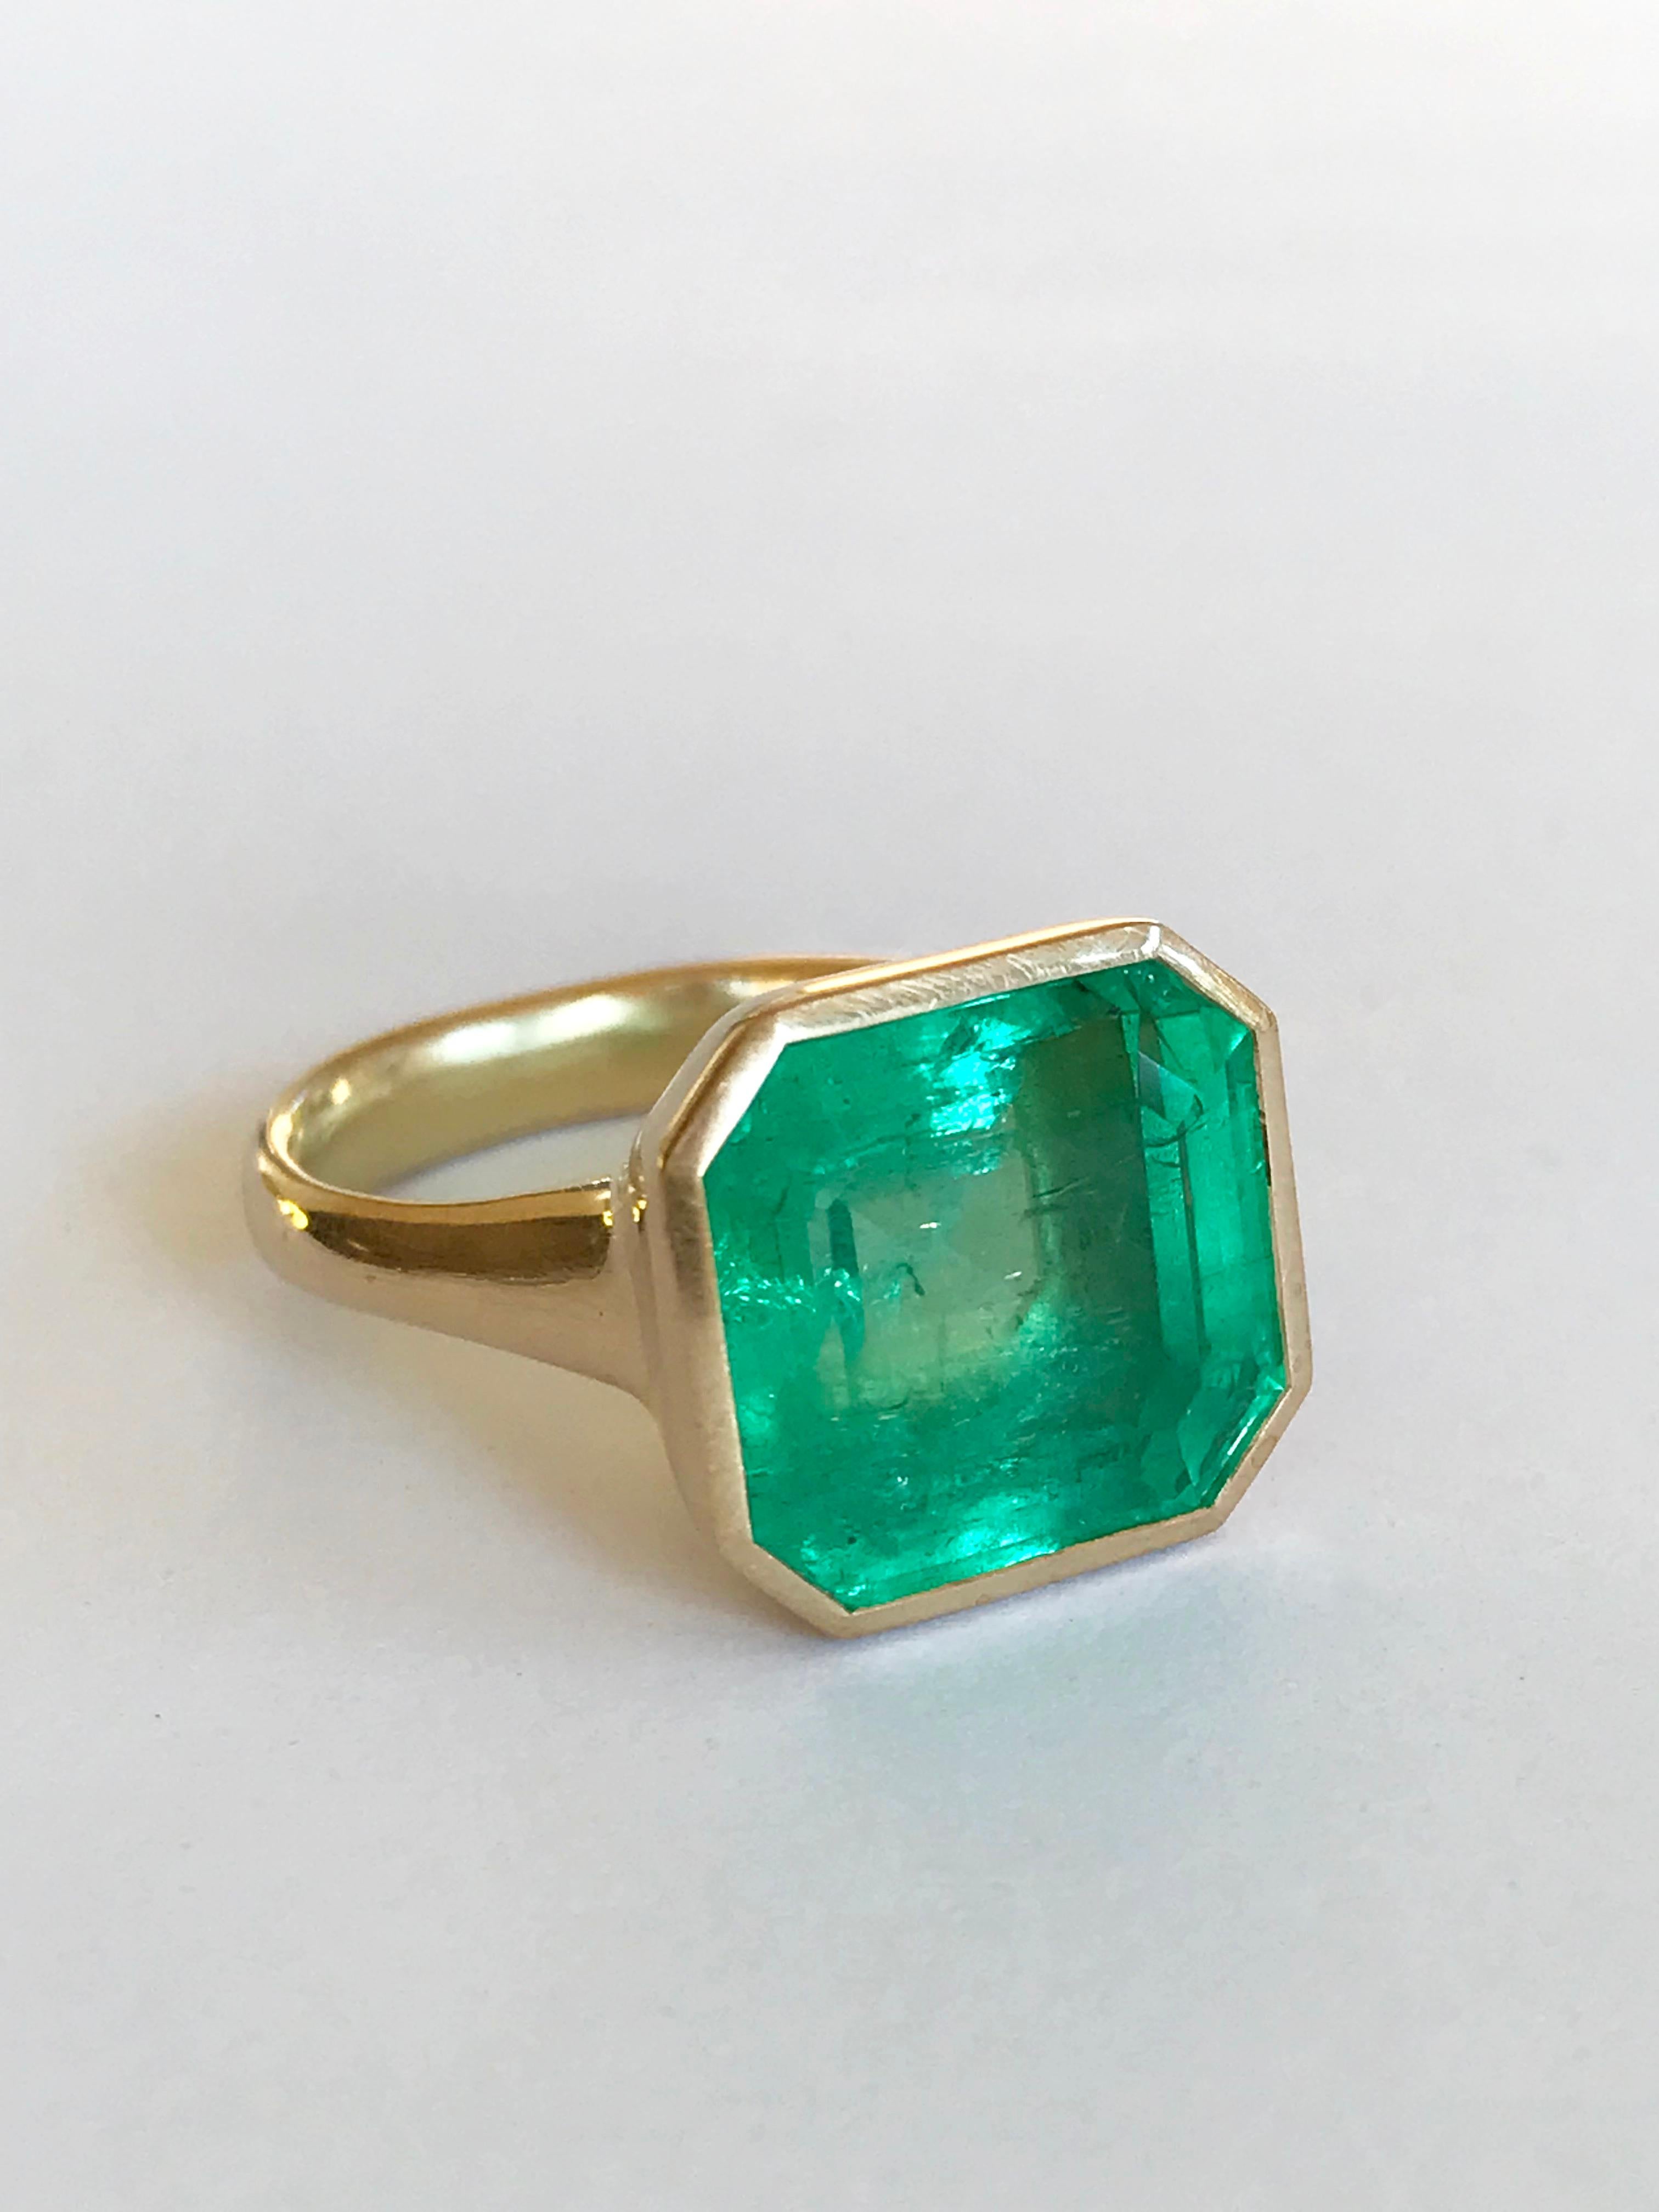 Dalben design One of a Kind 18k yellow gold semi lucid finishing ring with a magnificent 9,69 carat bezel-set emerald cut Colombian emerald. 
The Colombian emerald is accompanied by IGI (Italian Gemological Institute ) Certificate.
Ring size 7 1/4